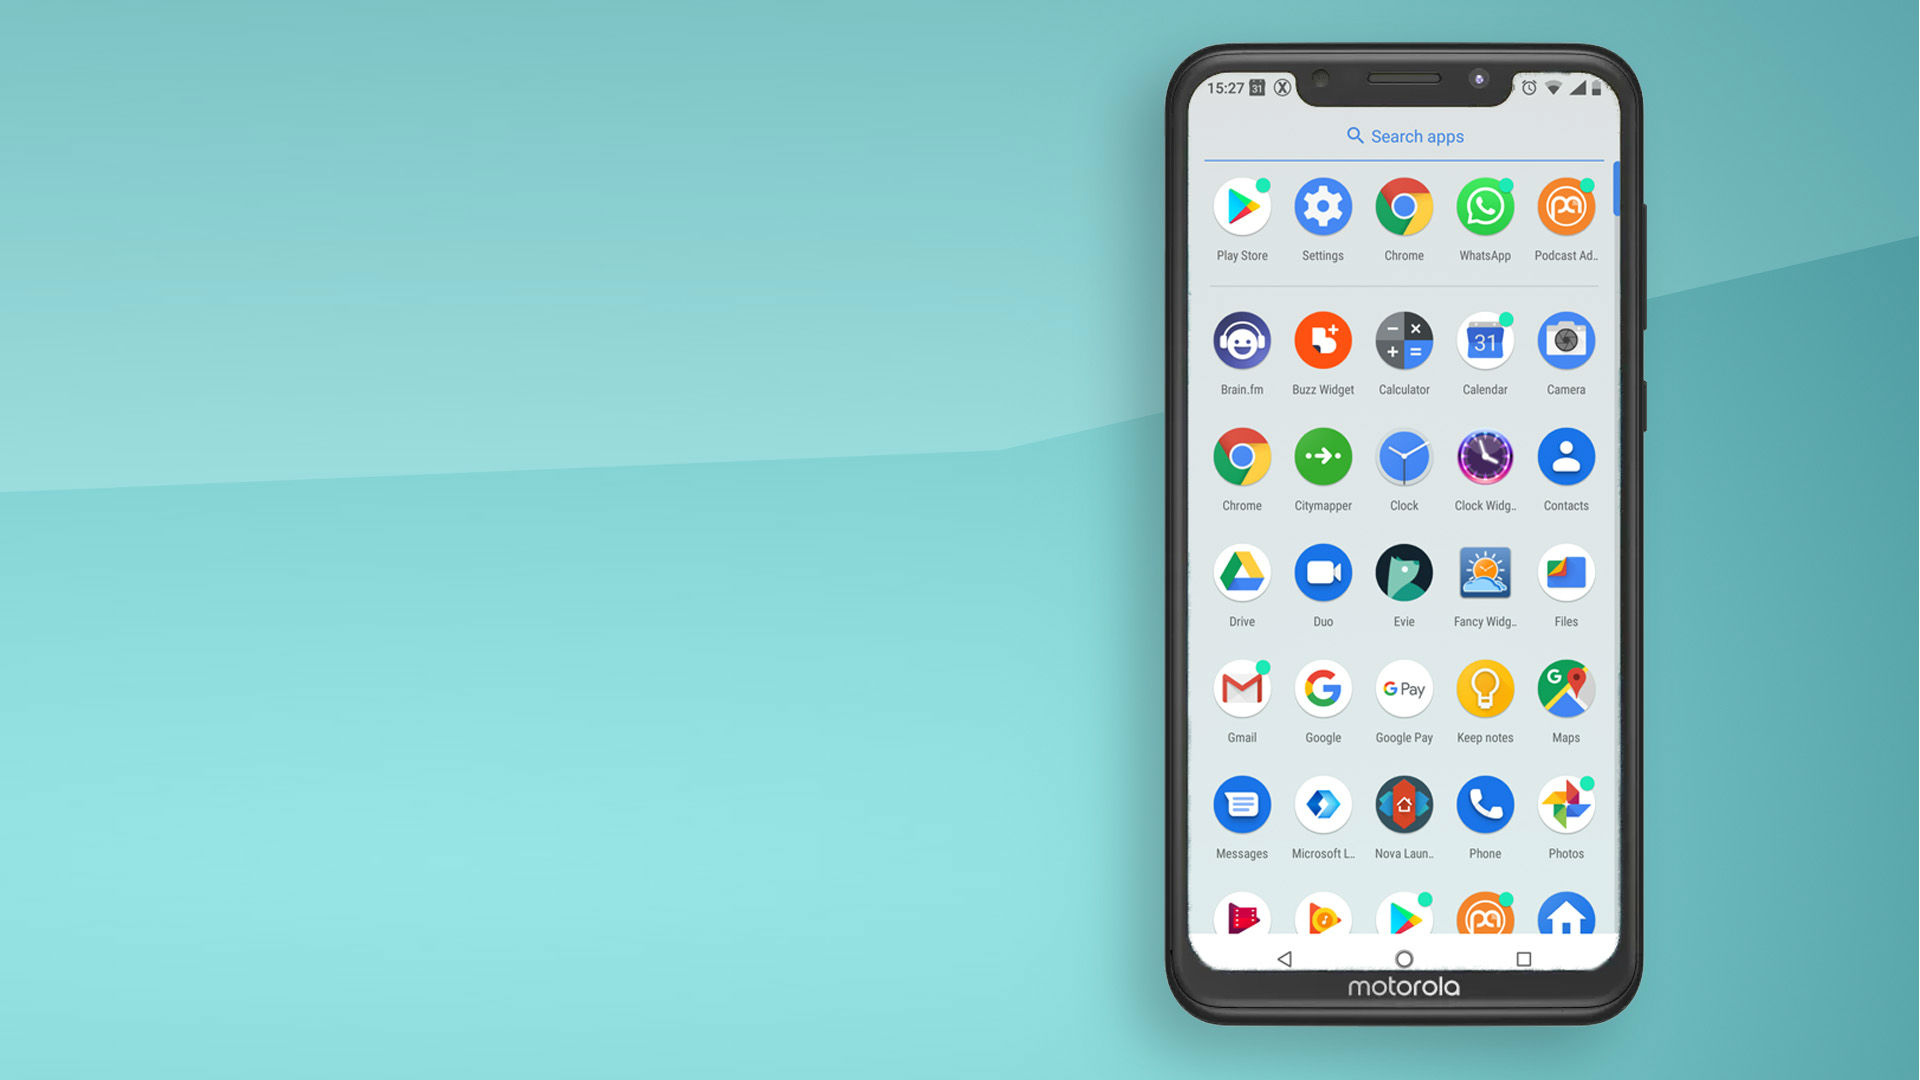 Android One User Interface - HD Wallpaper 